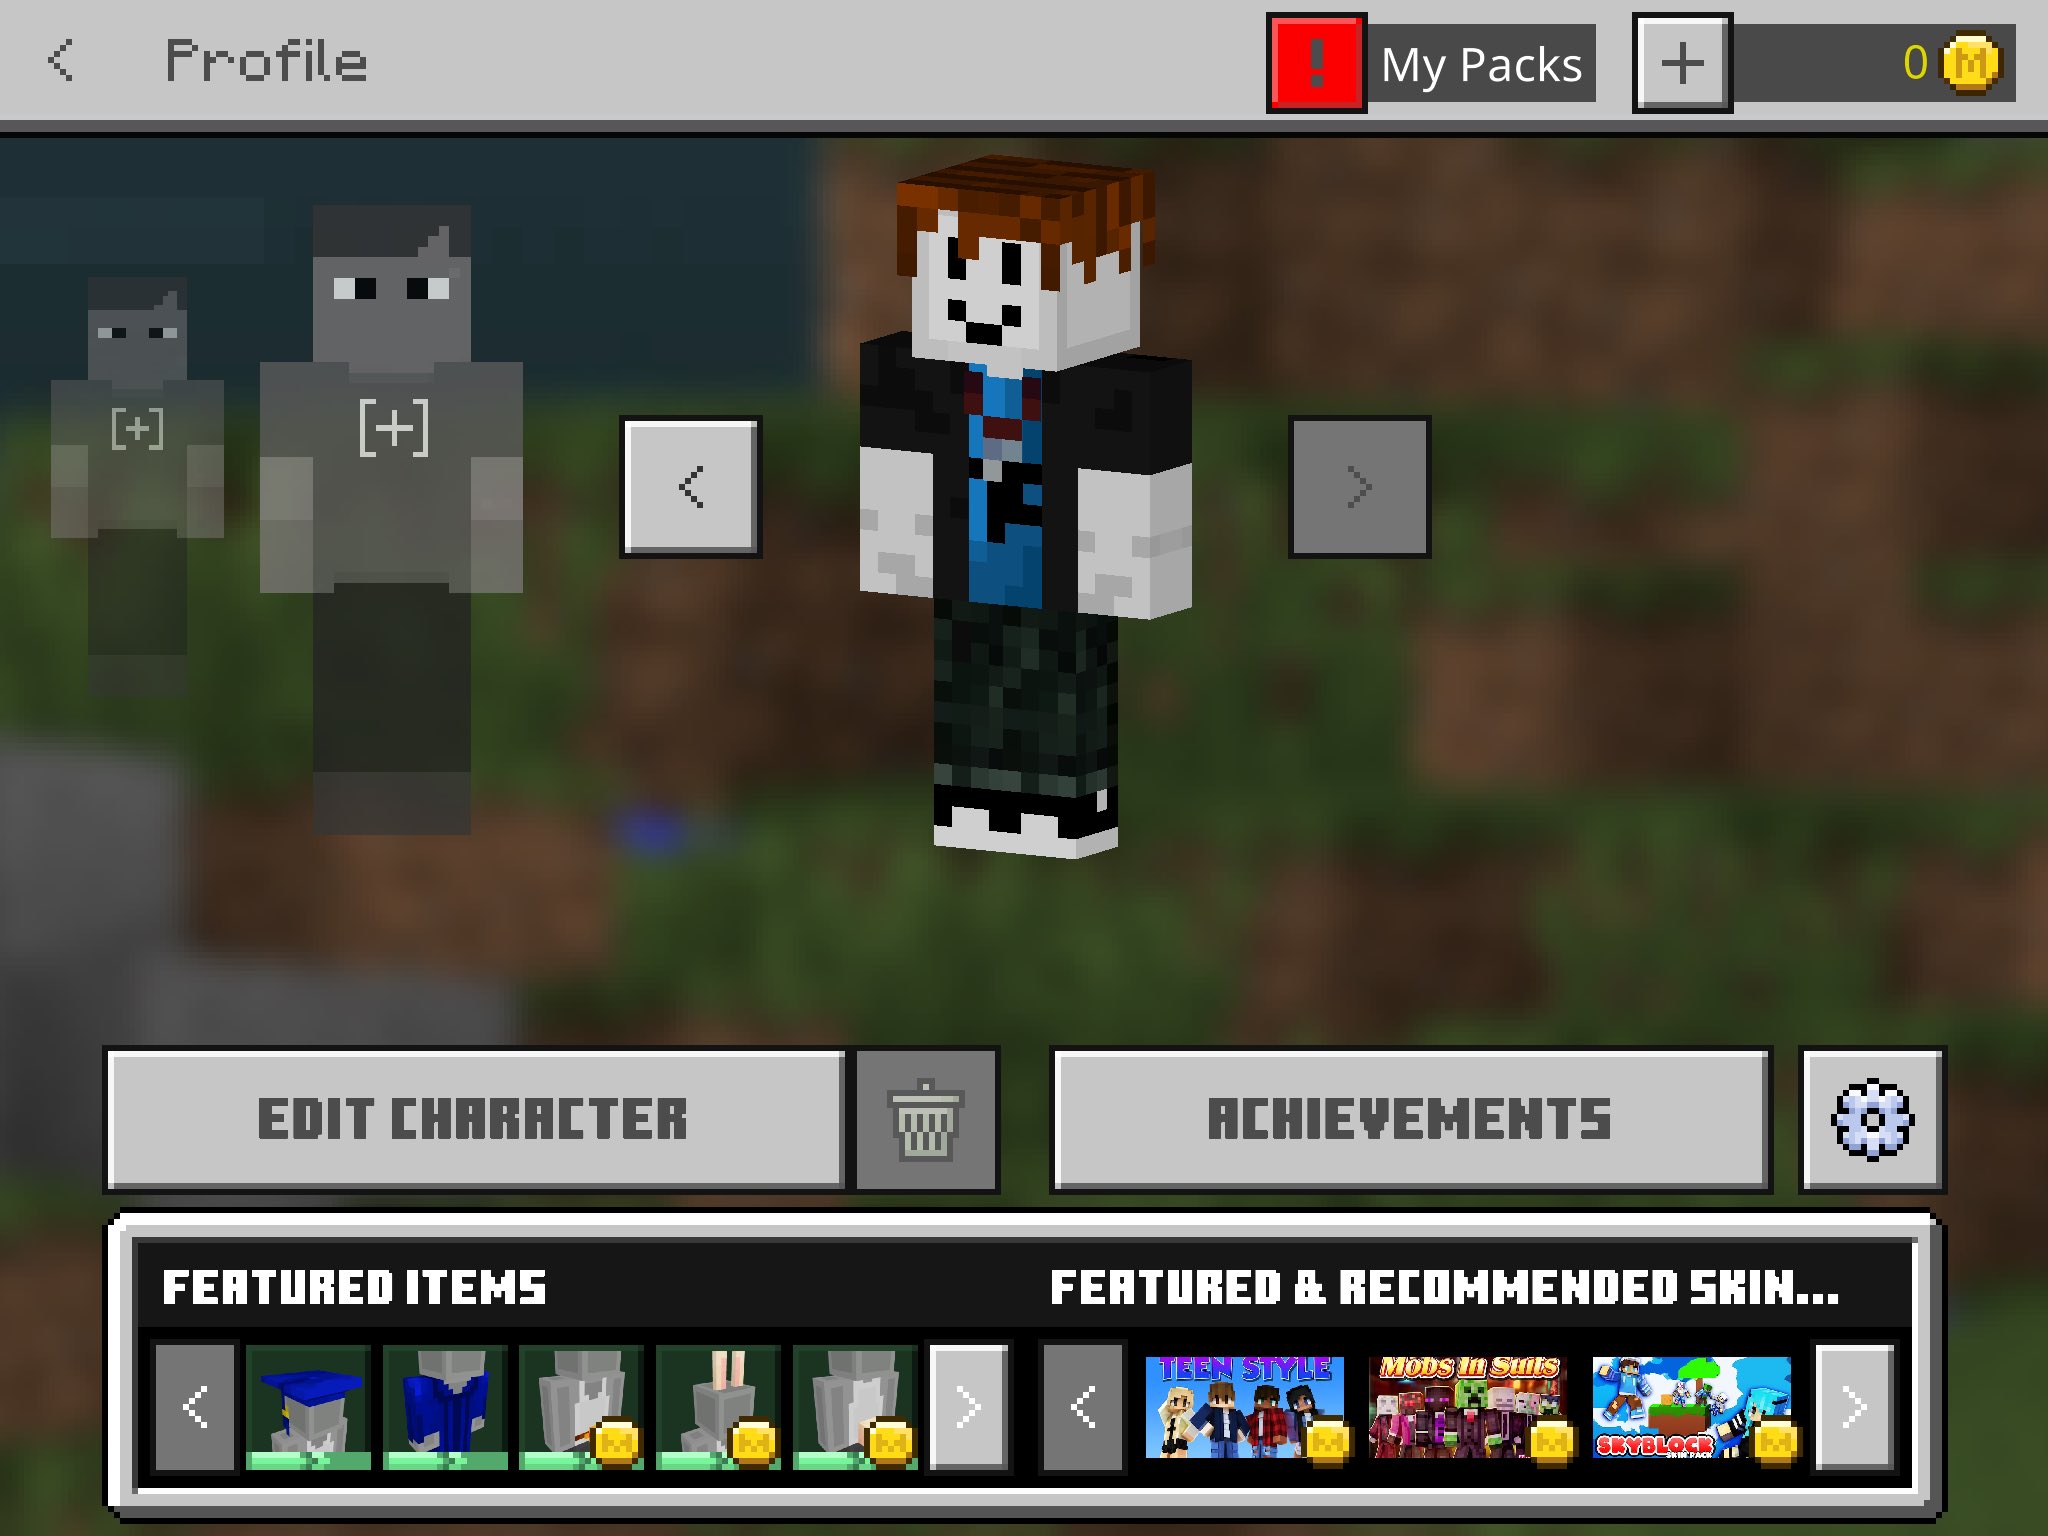 Spheryc on X: I really like @Roblox so much that my Minecraft